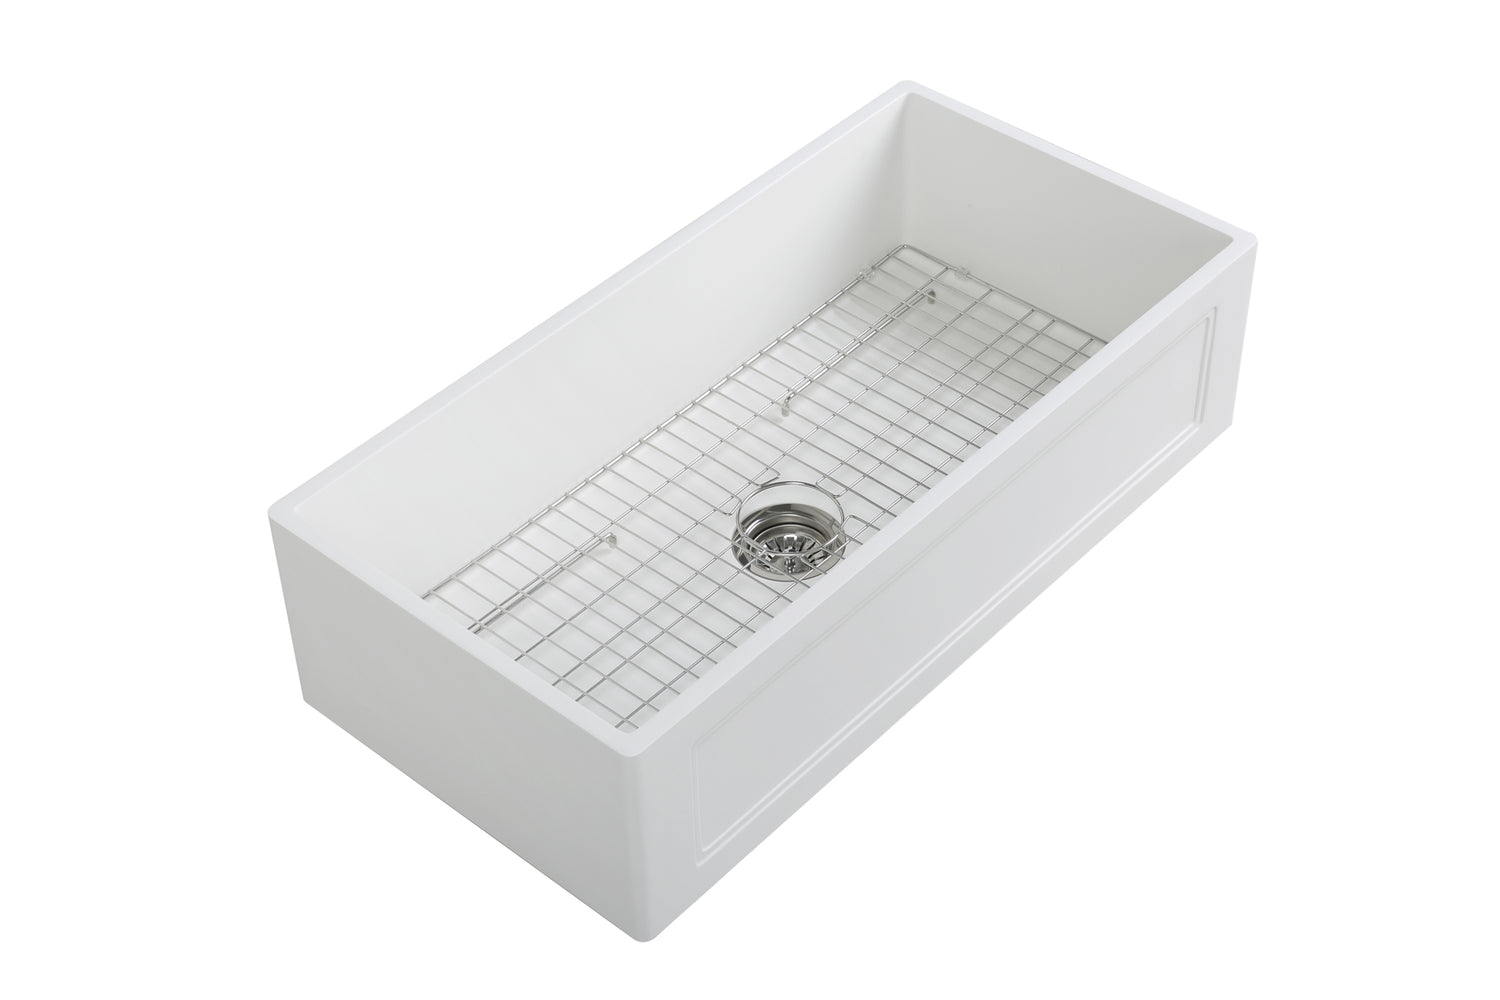 36'' Streamline K-1836-KS-36ART Reversible Solid Surface Resin Kitchen Sink With Stainless Steel Grid and Strainer Image